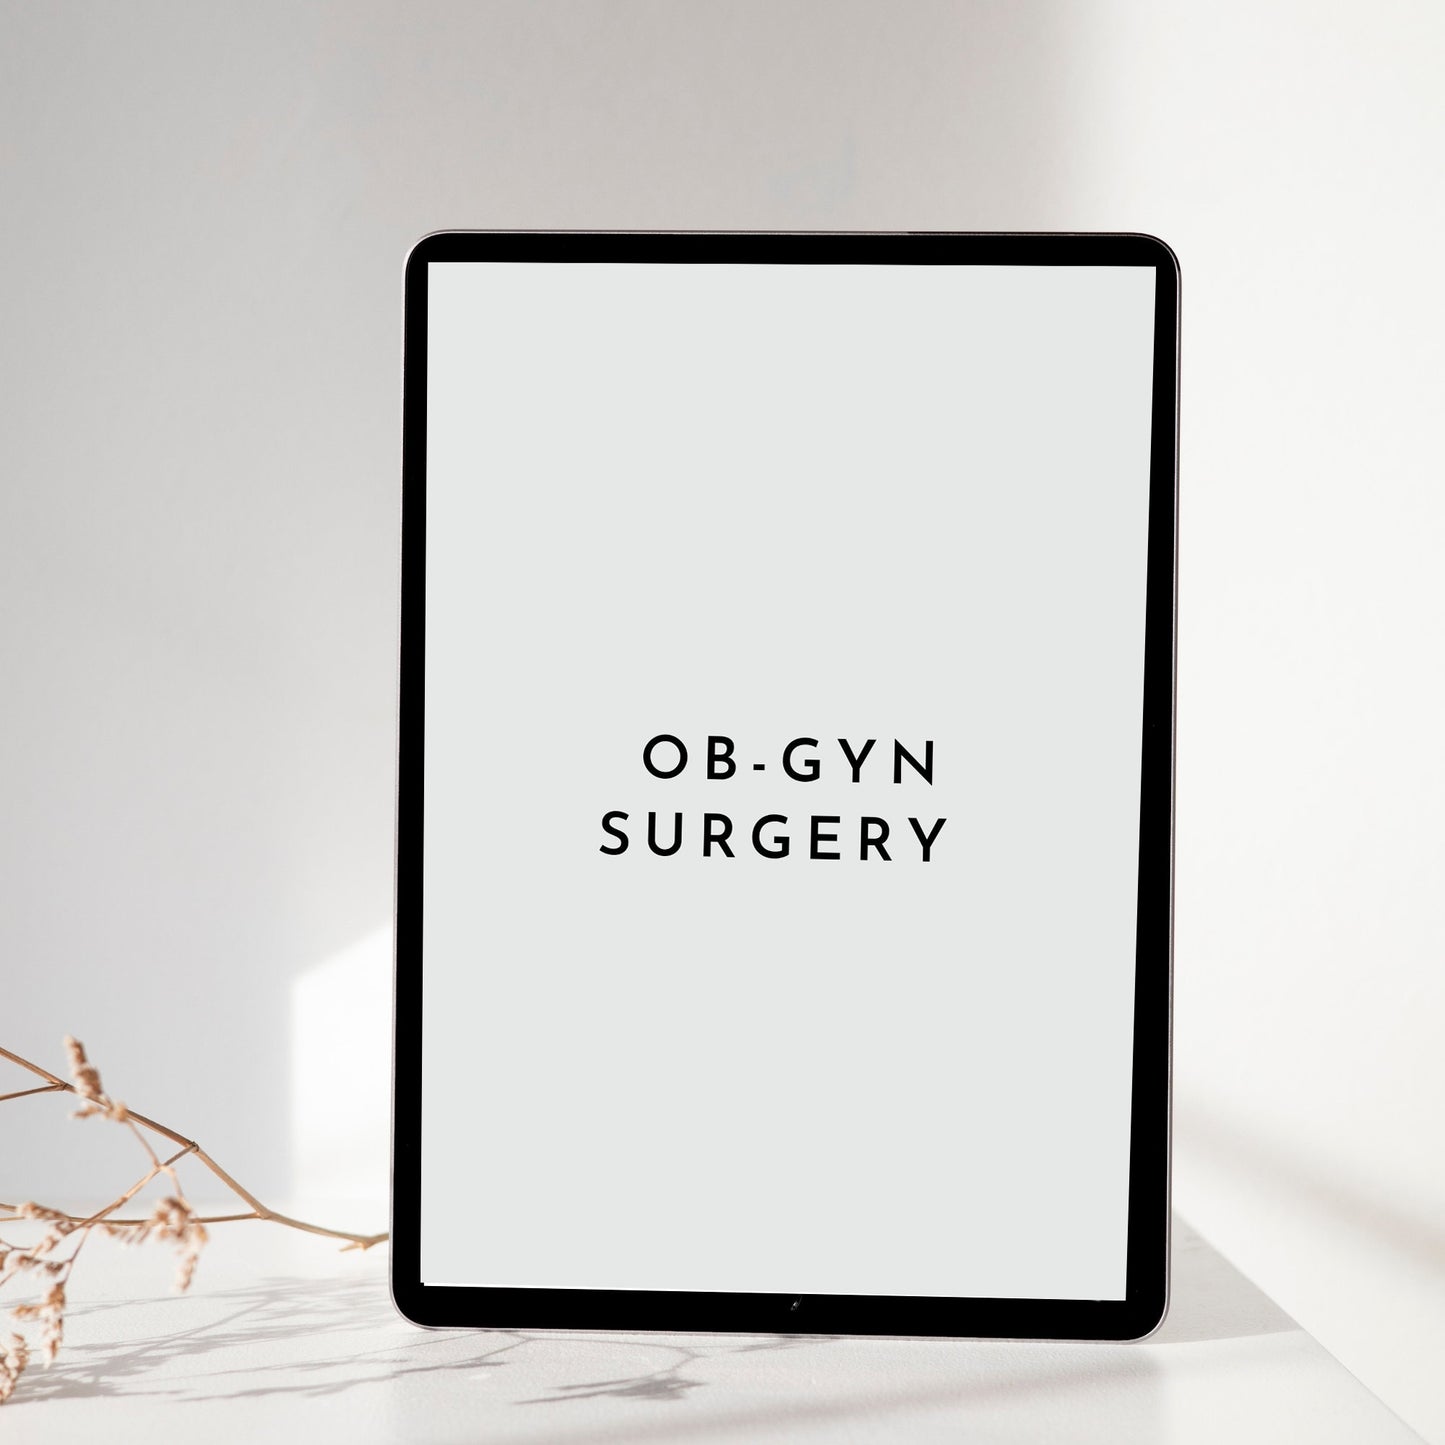 OBGyn Obstetric Gynecology surgical instruments tools flashcards OR Operating Room Surgery rotation Surgical Tech clinical Medical student